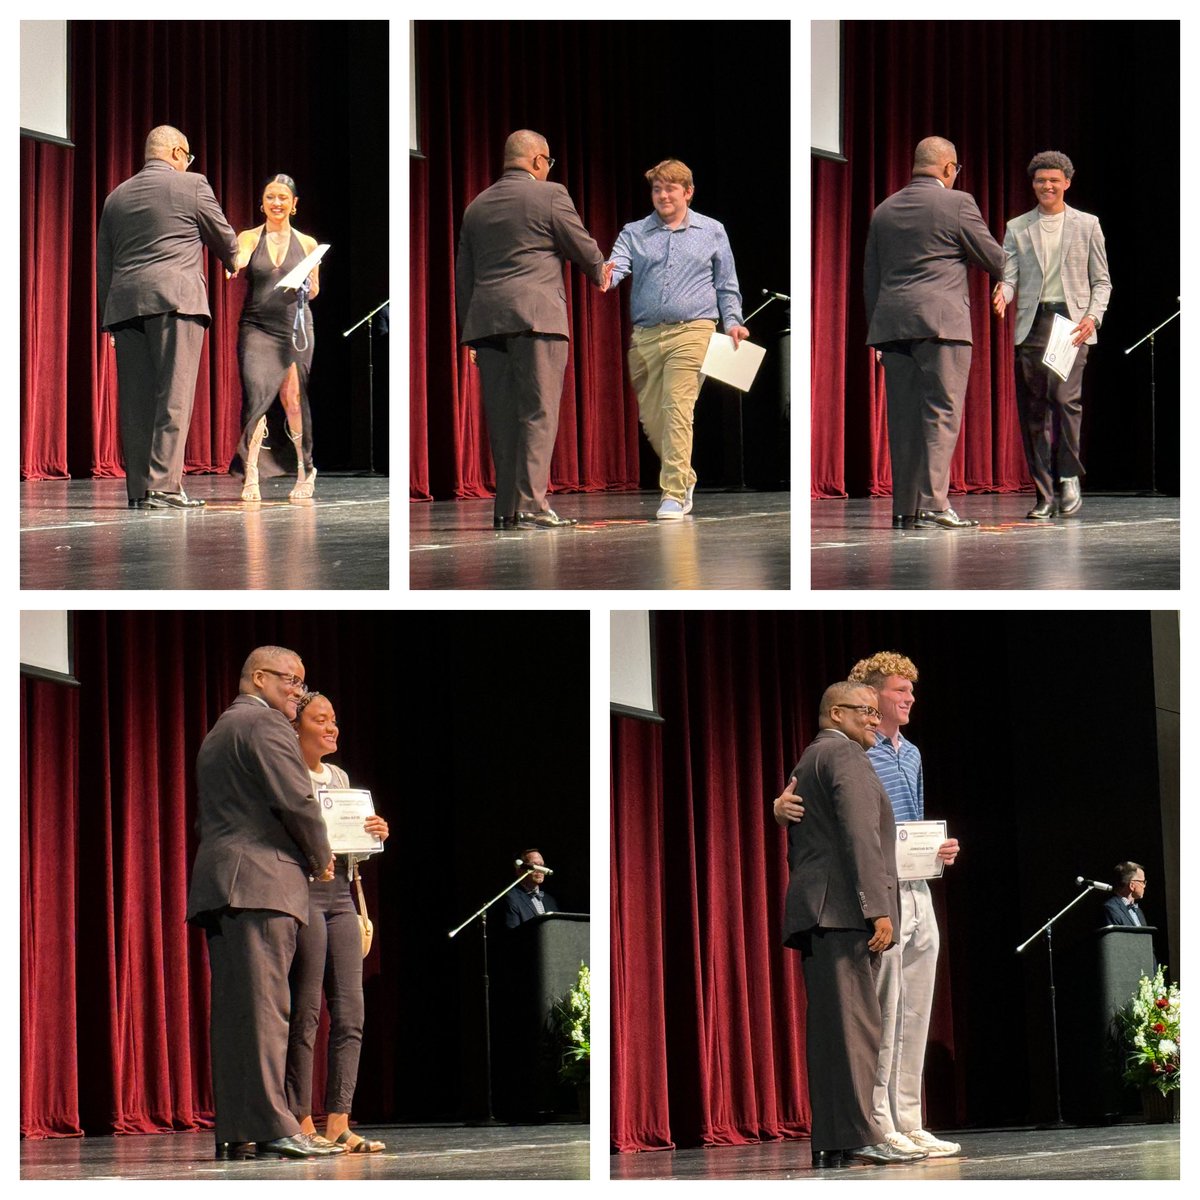 It’s a pleasure to present the superintendent’s award to those @LCHSBears seniors who have earned straight A’s for the first 3 quarters of the academic school year. All not pictured here due to the number recognized! #LTpride #GoBears